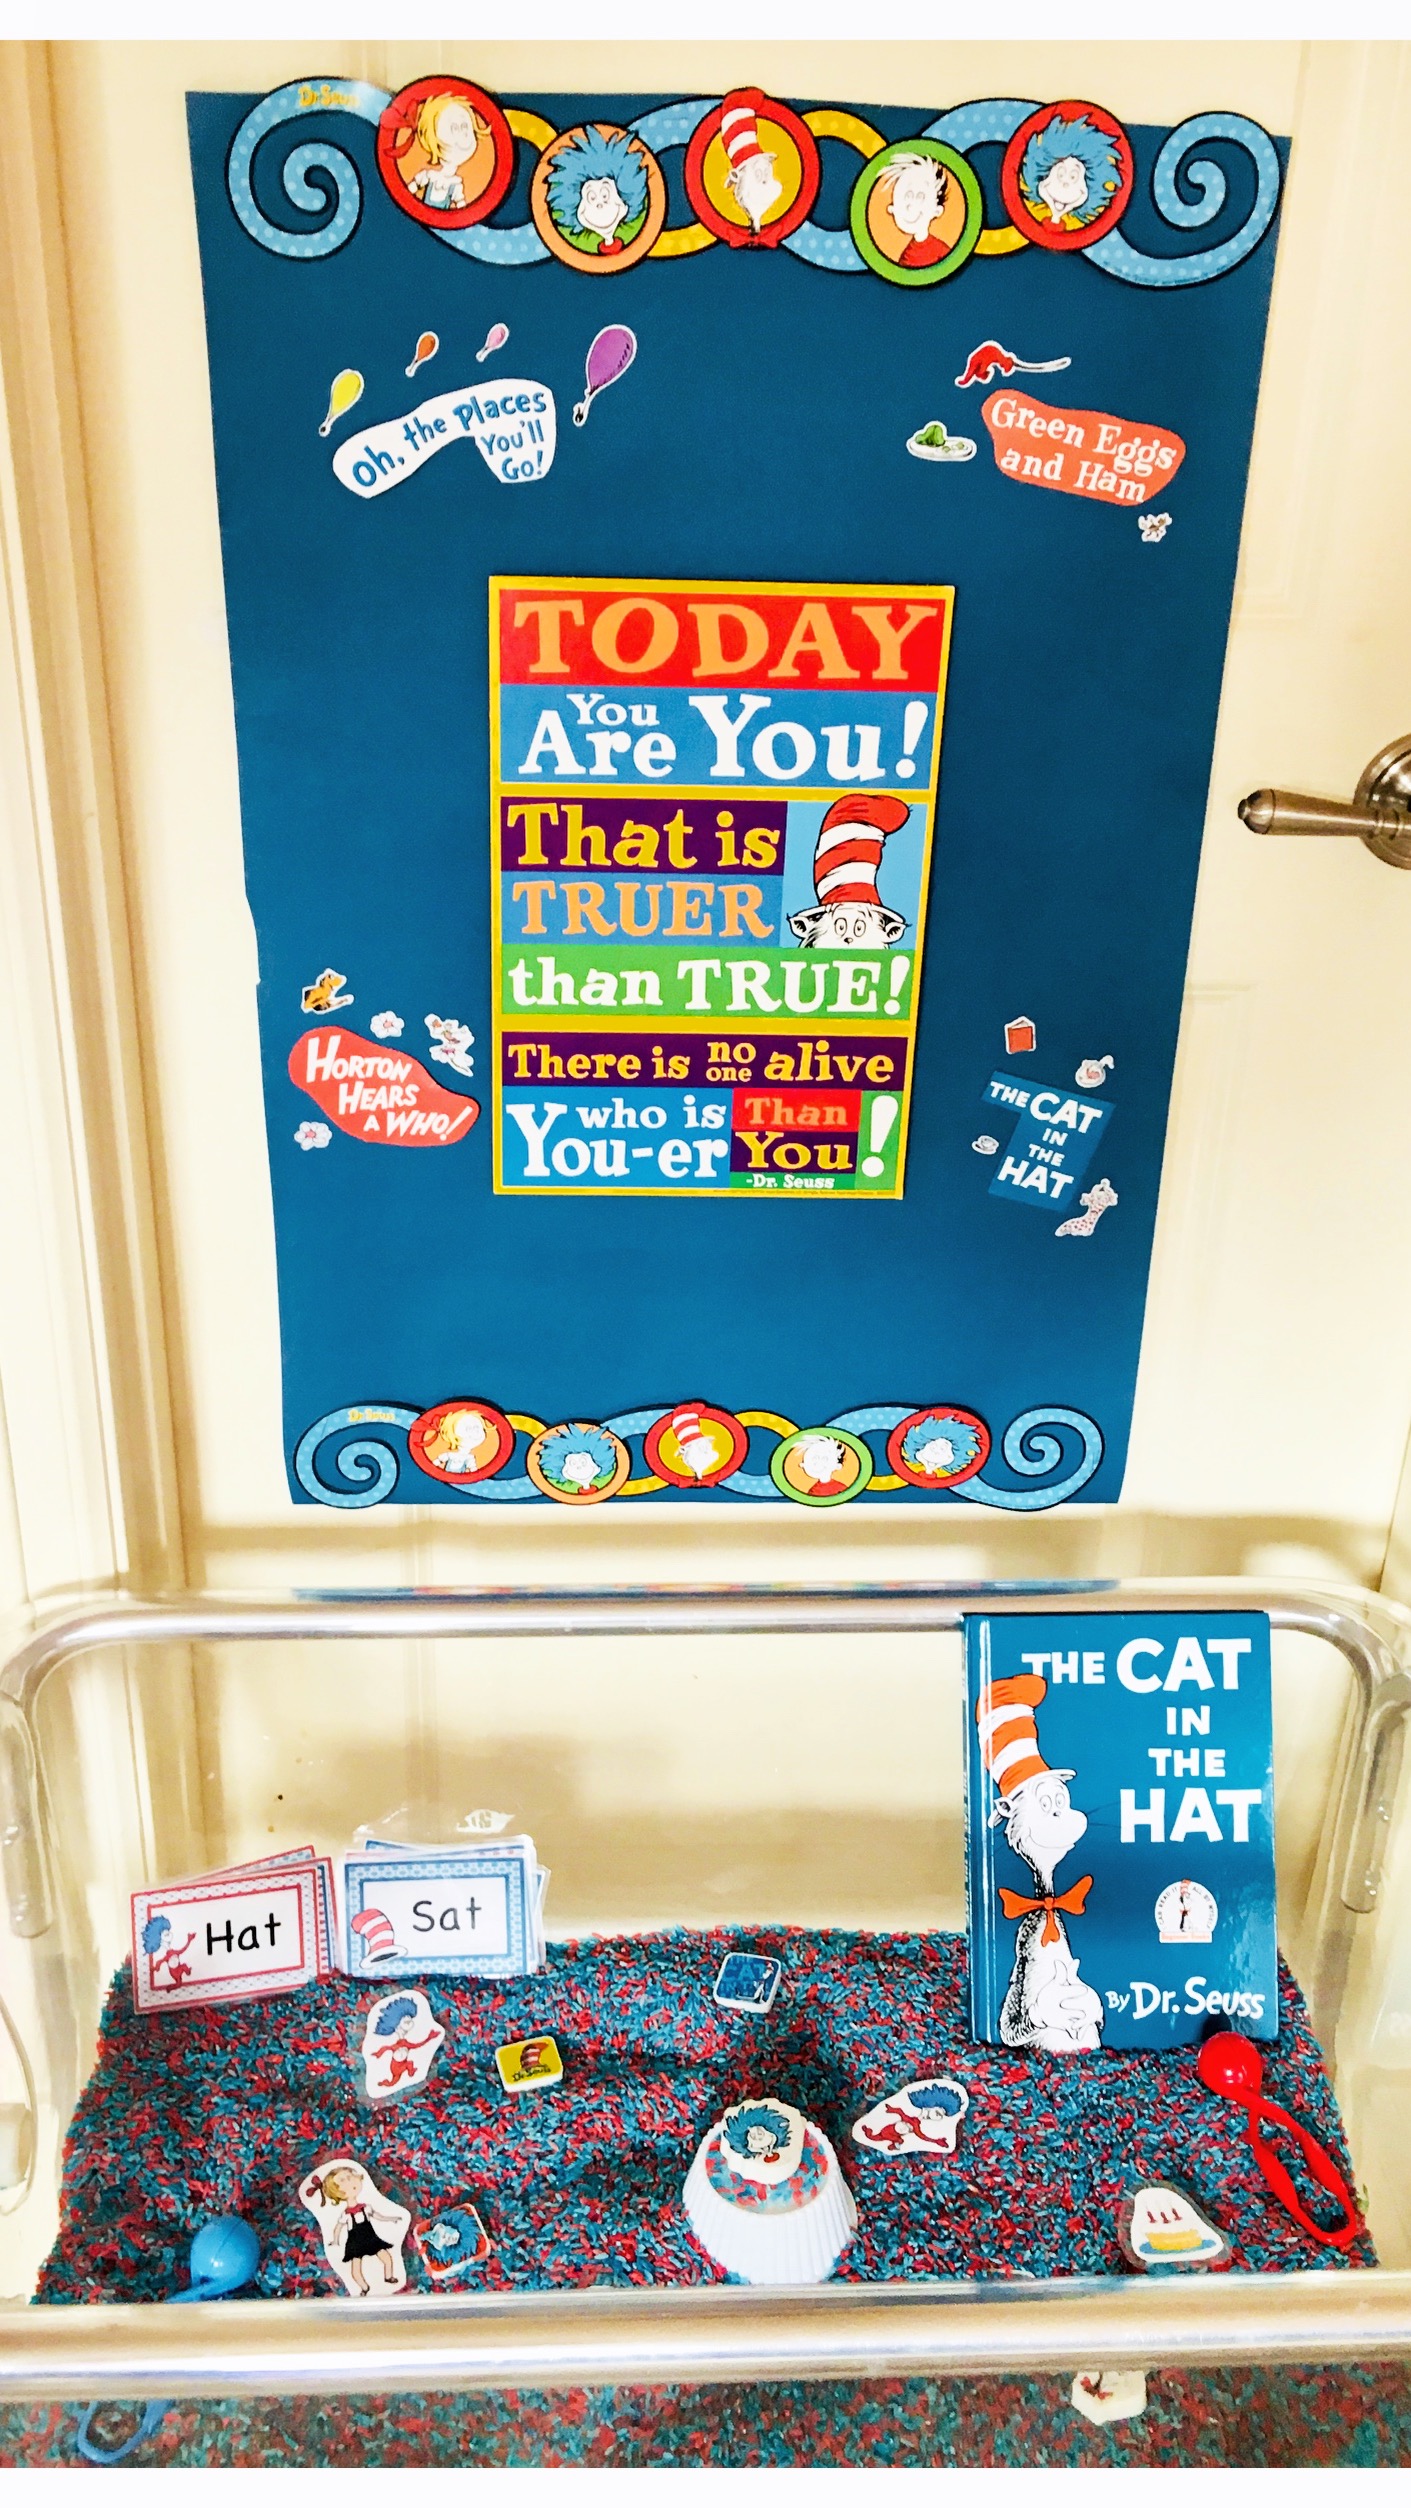 💙 The Cat In The Hat Sensory Bin ❤️ With Dr. Seuss’s Birthday just around the corner and Read Across America Day quickly approaching, I thought I’d share some of our favorite Dr. Seuss Inspired play! 💙 Sensory bins, Cat in the Hat hats, name tags, playroom decor, etc